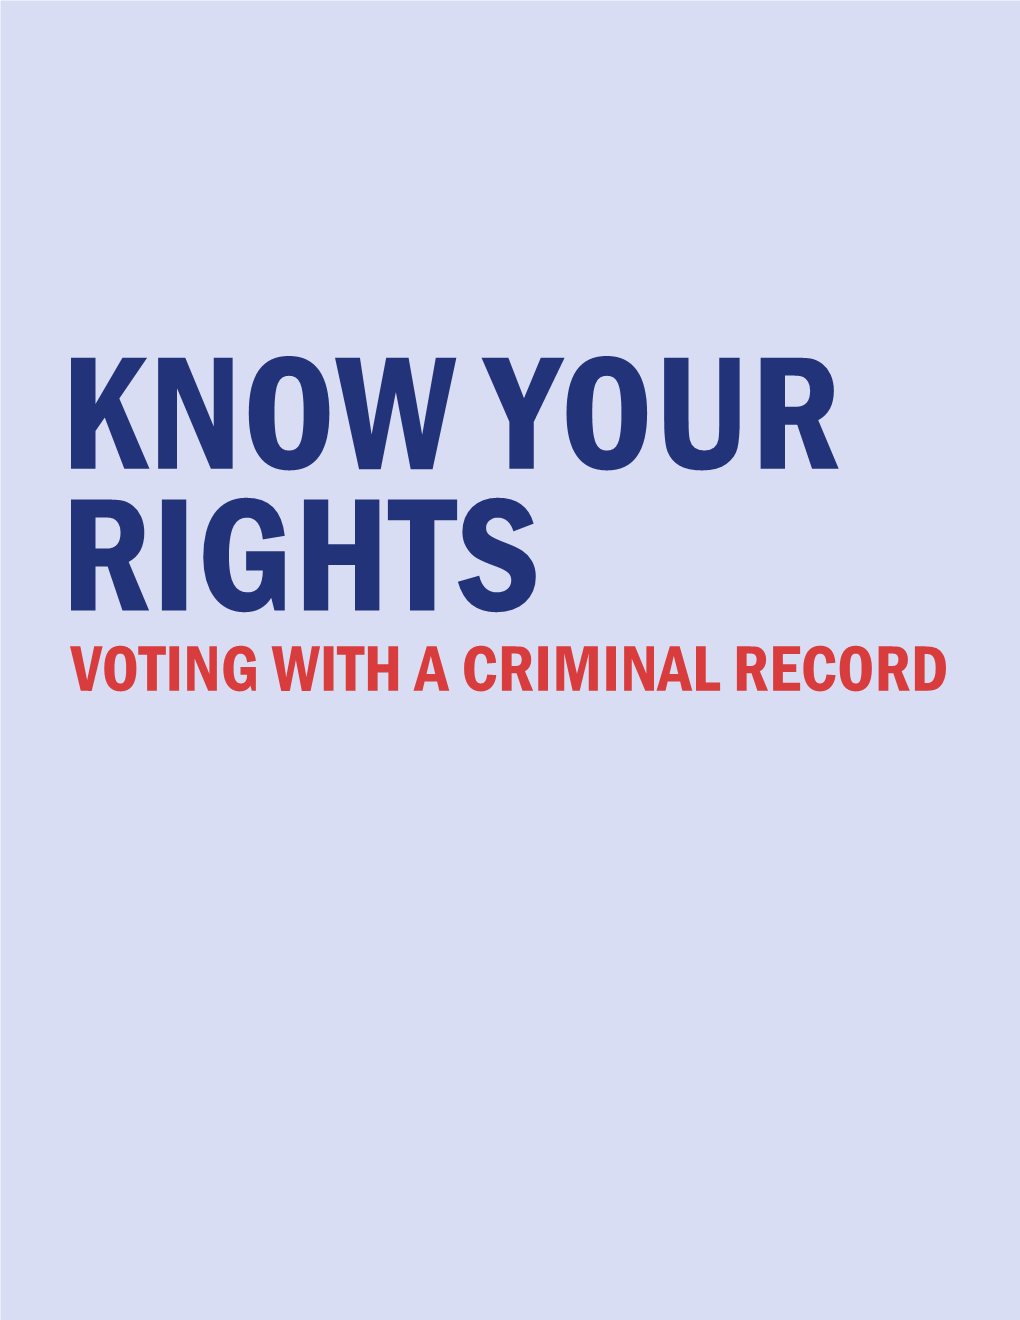 Voting with a Criminal Record